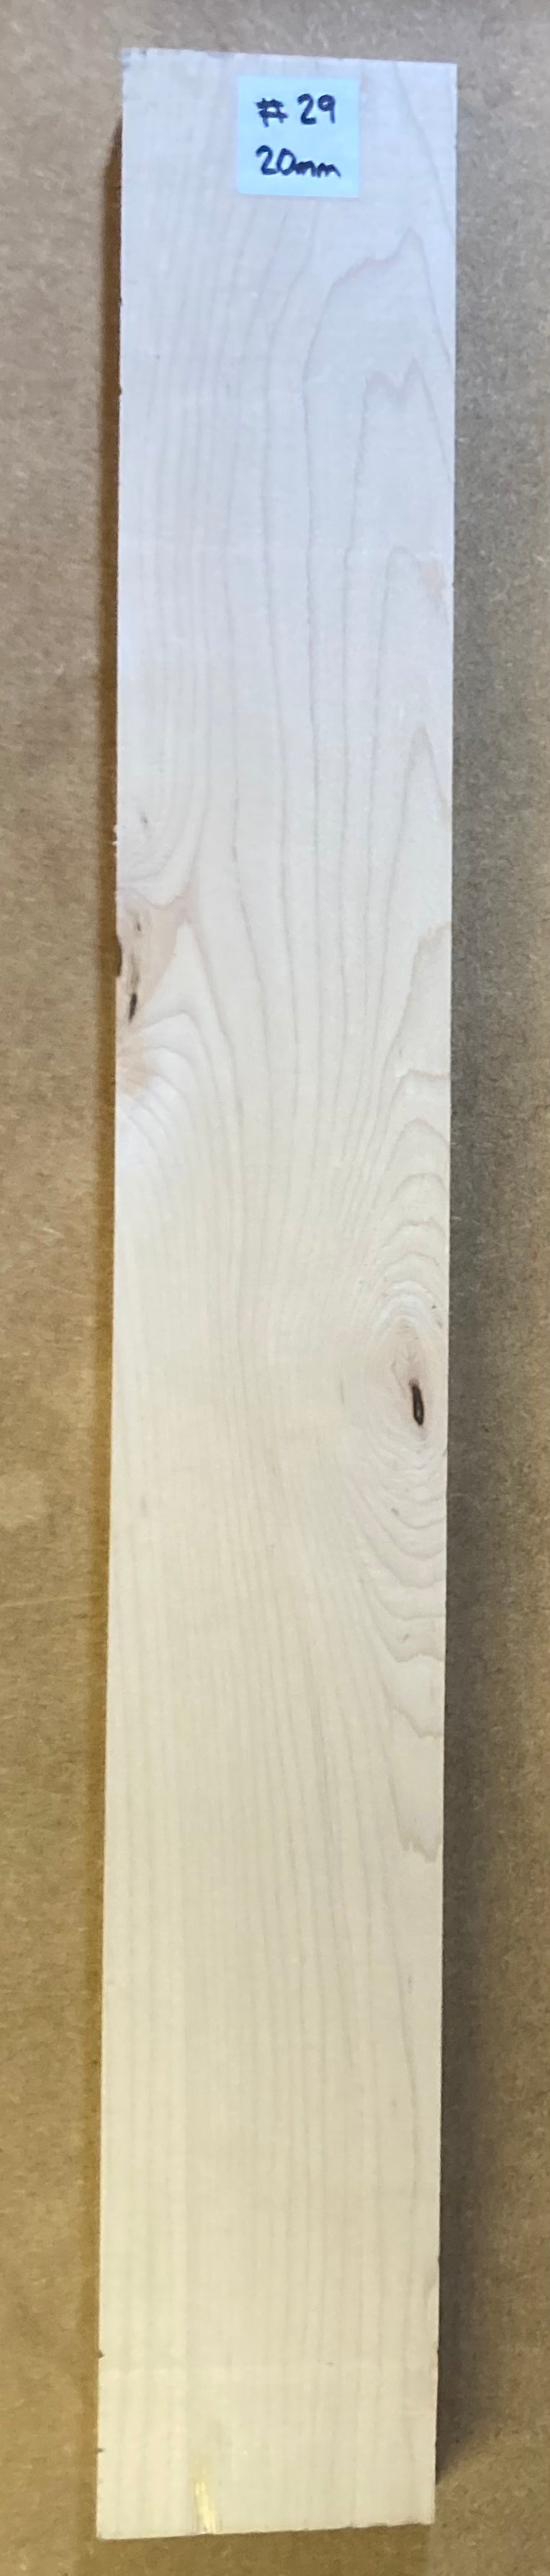 Electric Neck Blank - Maple #29